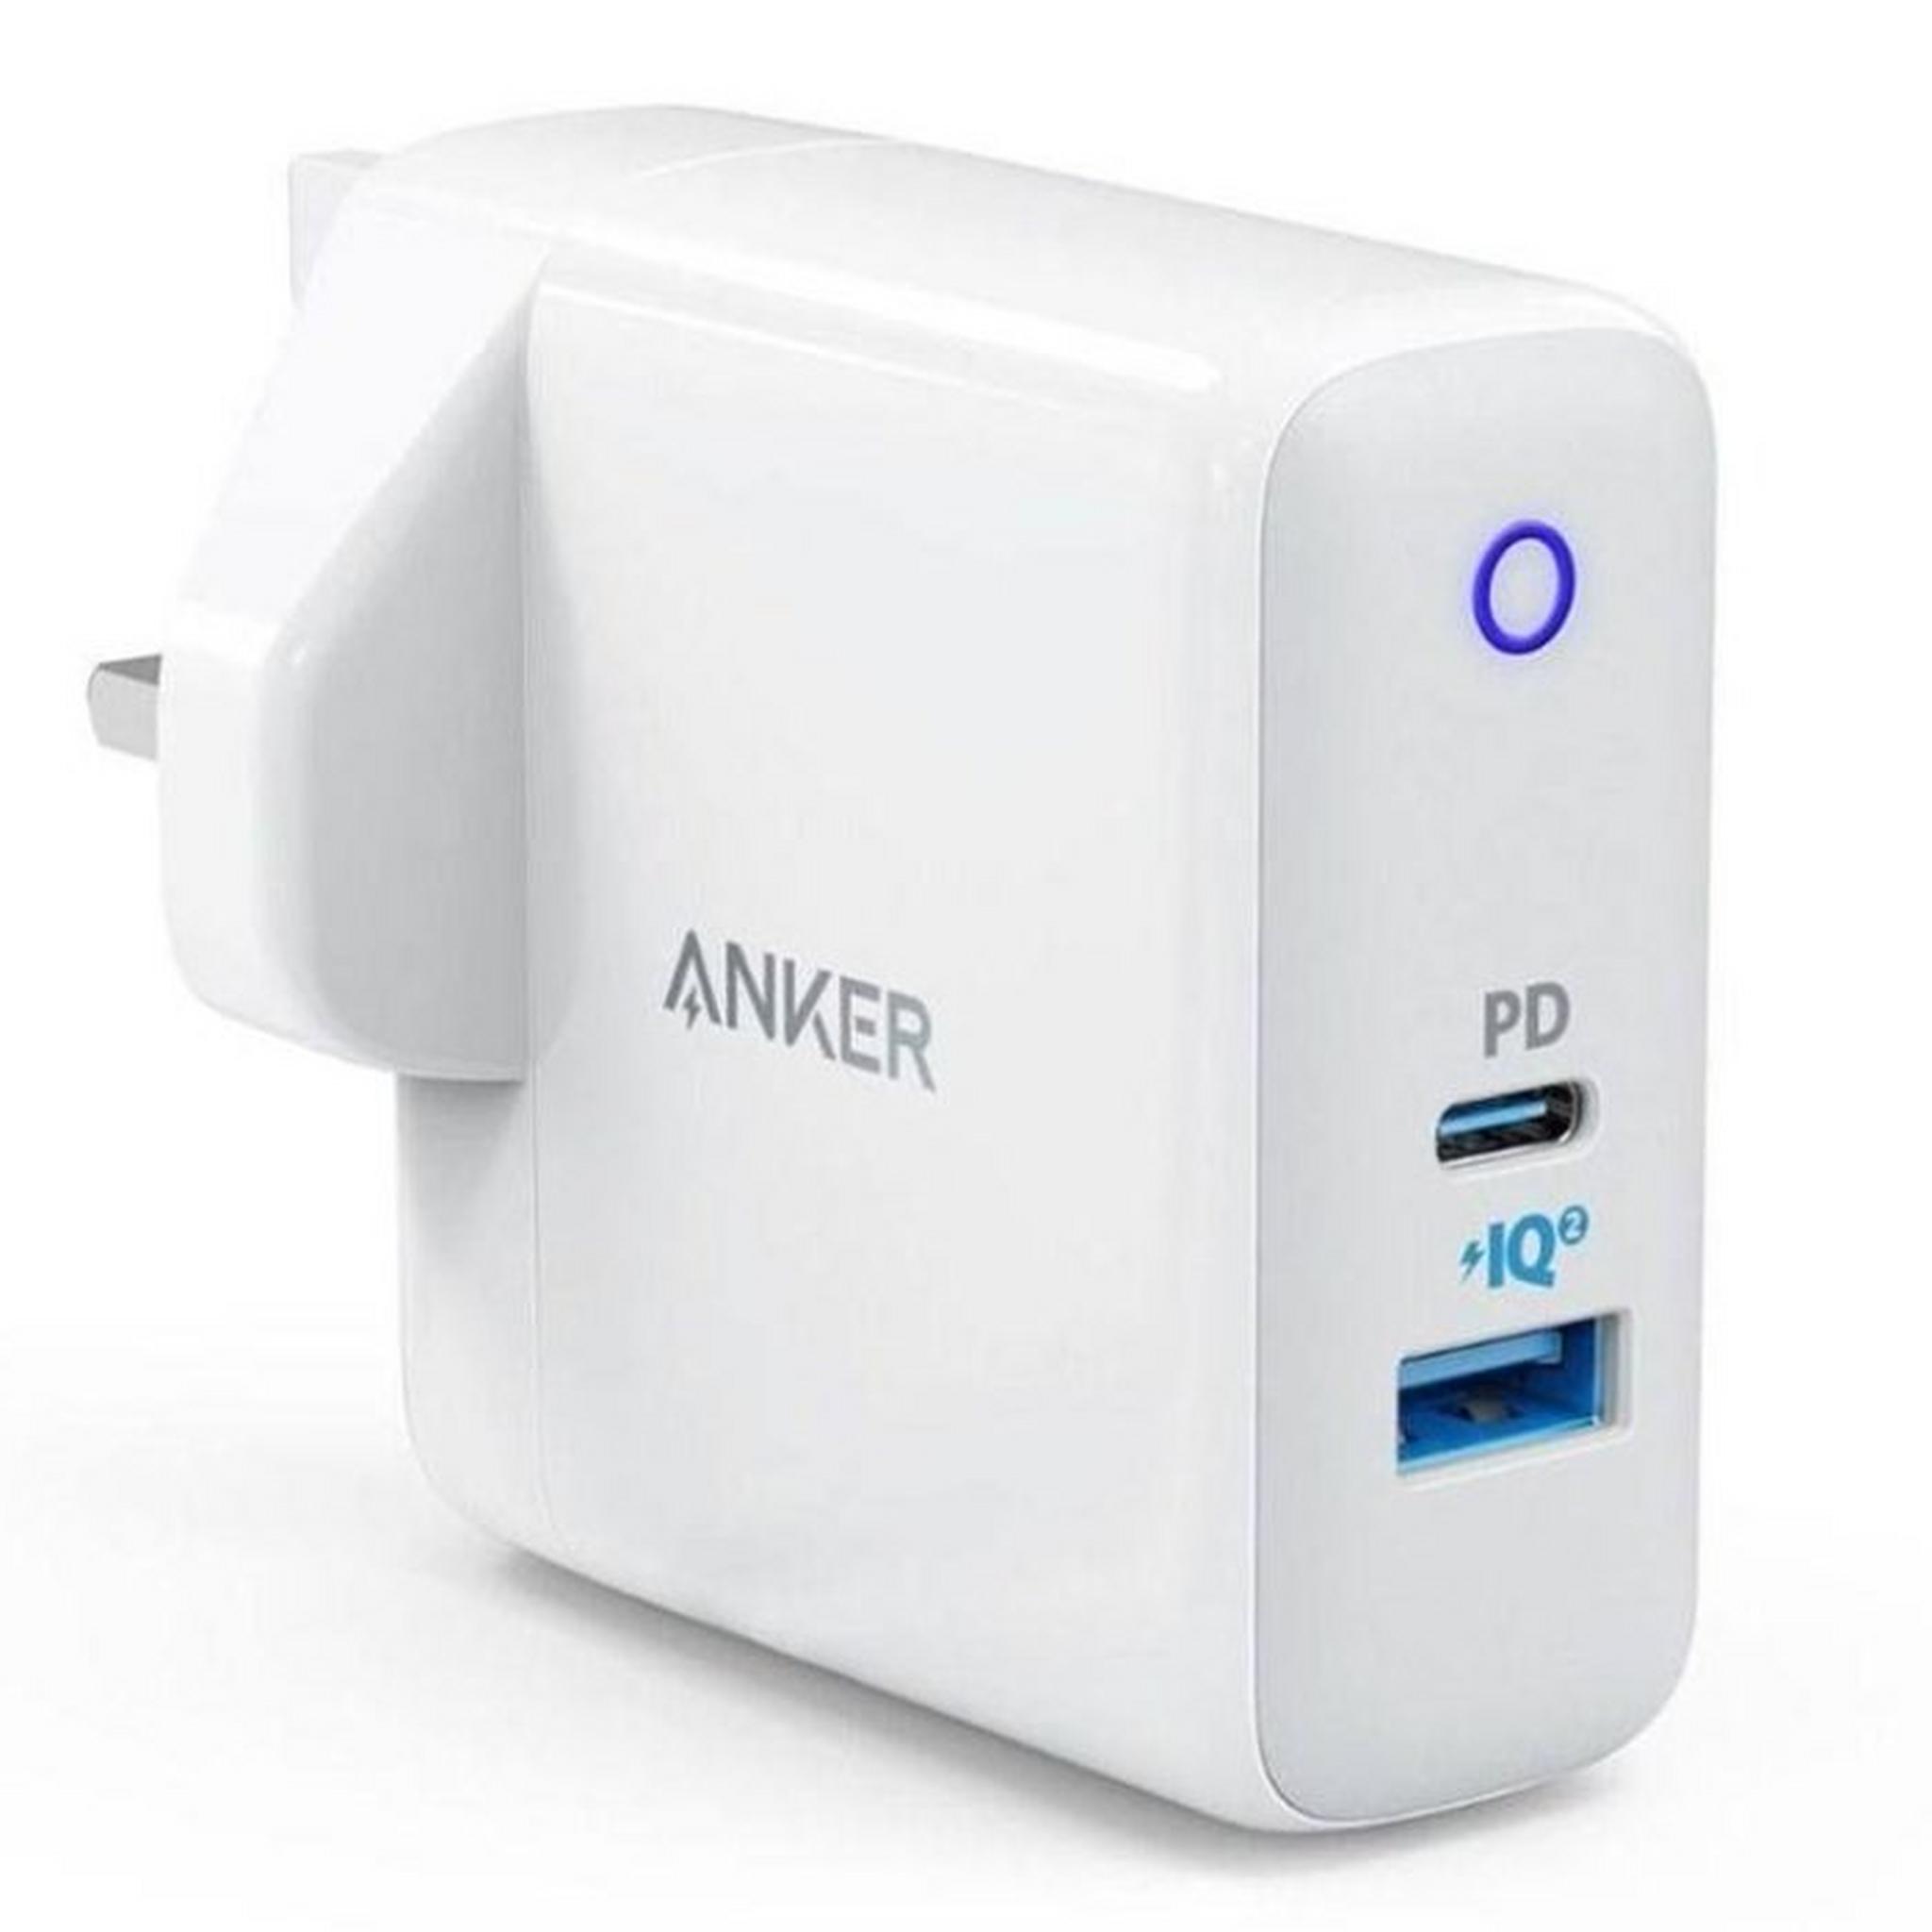 Anker PowerPort 35W 2-Ports Wall Charger - White